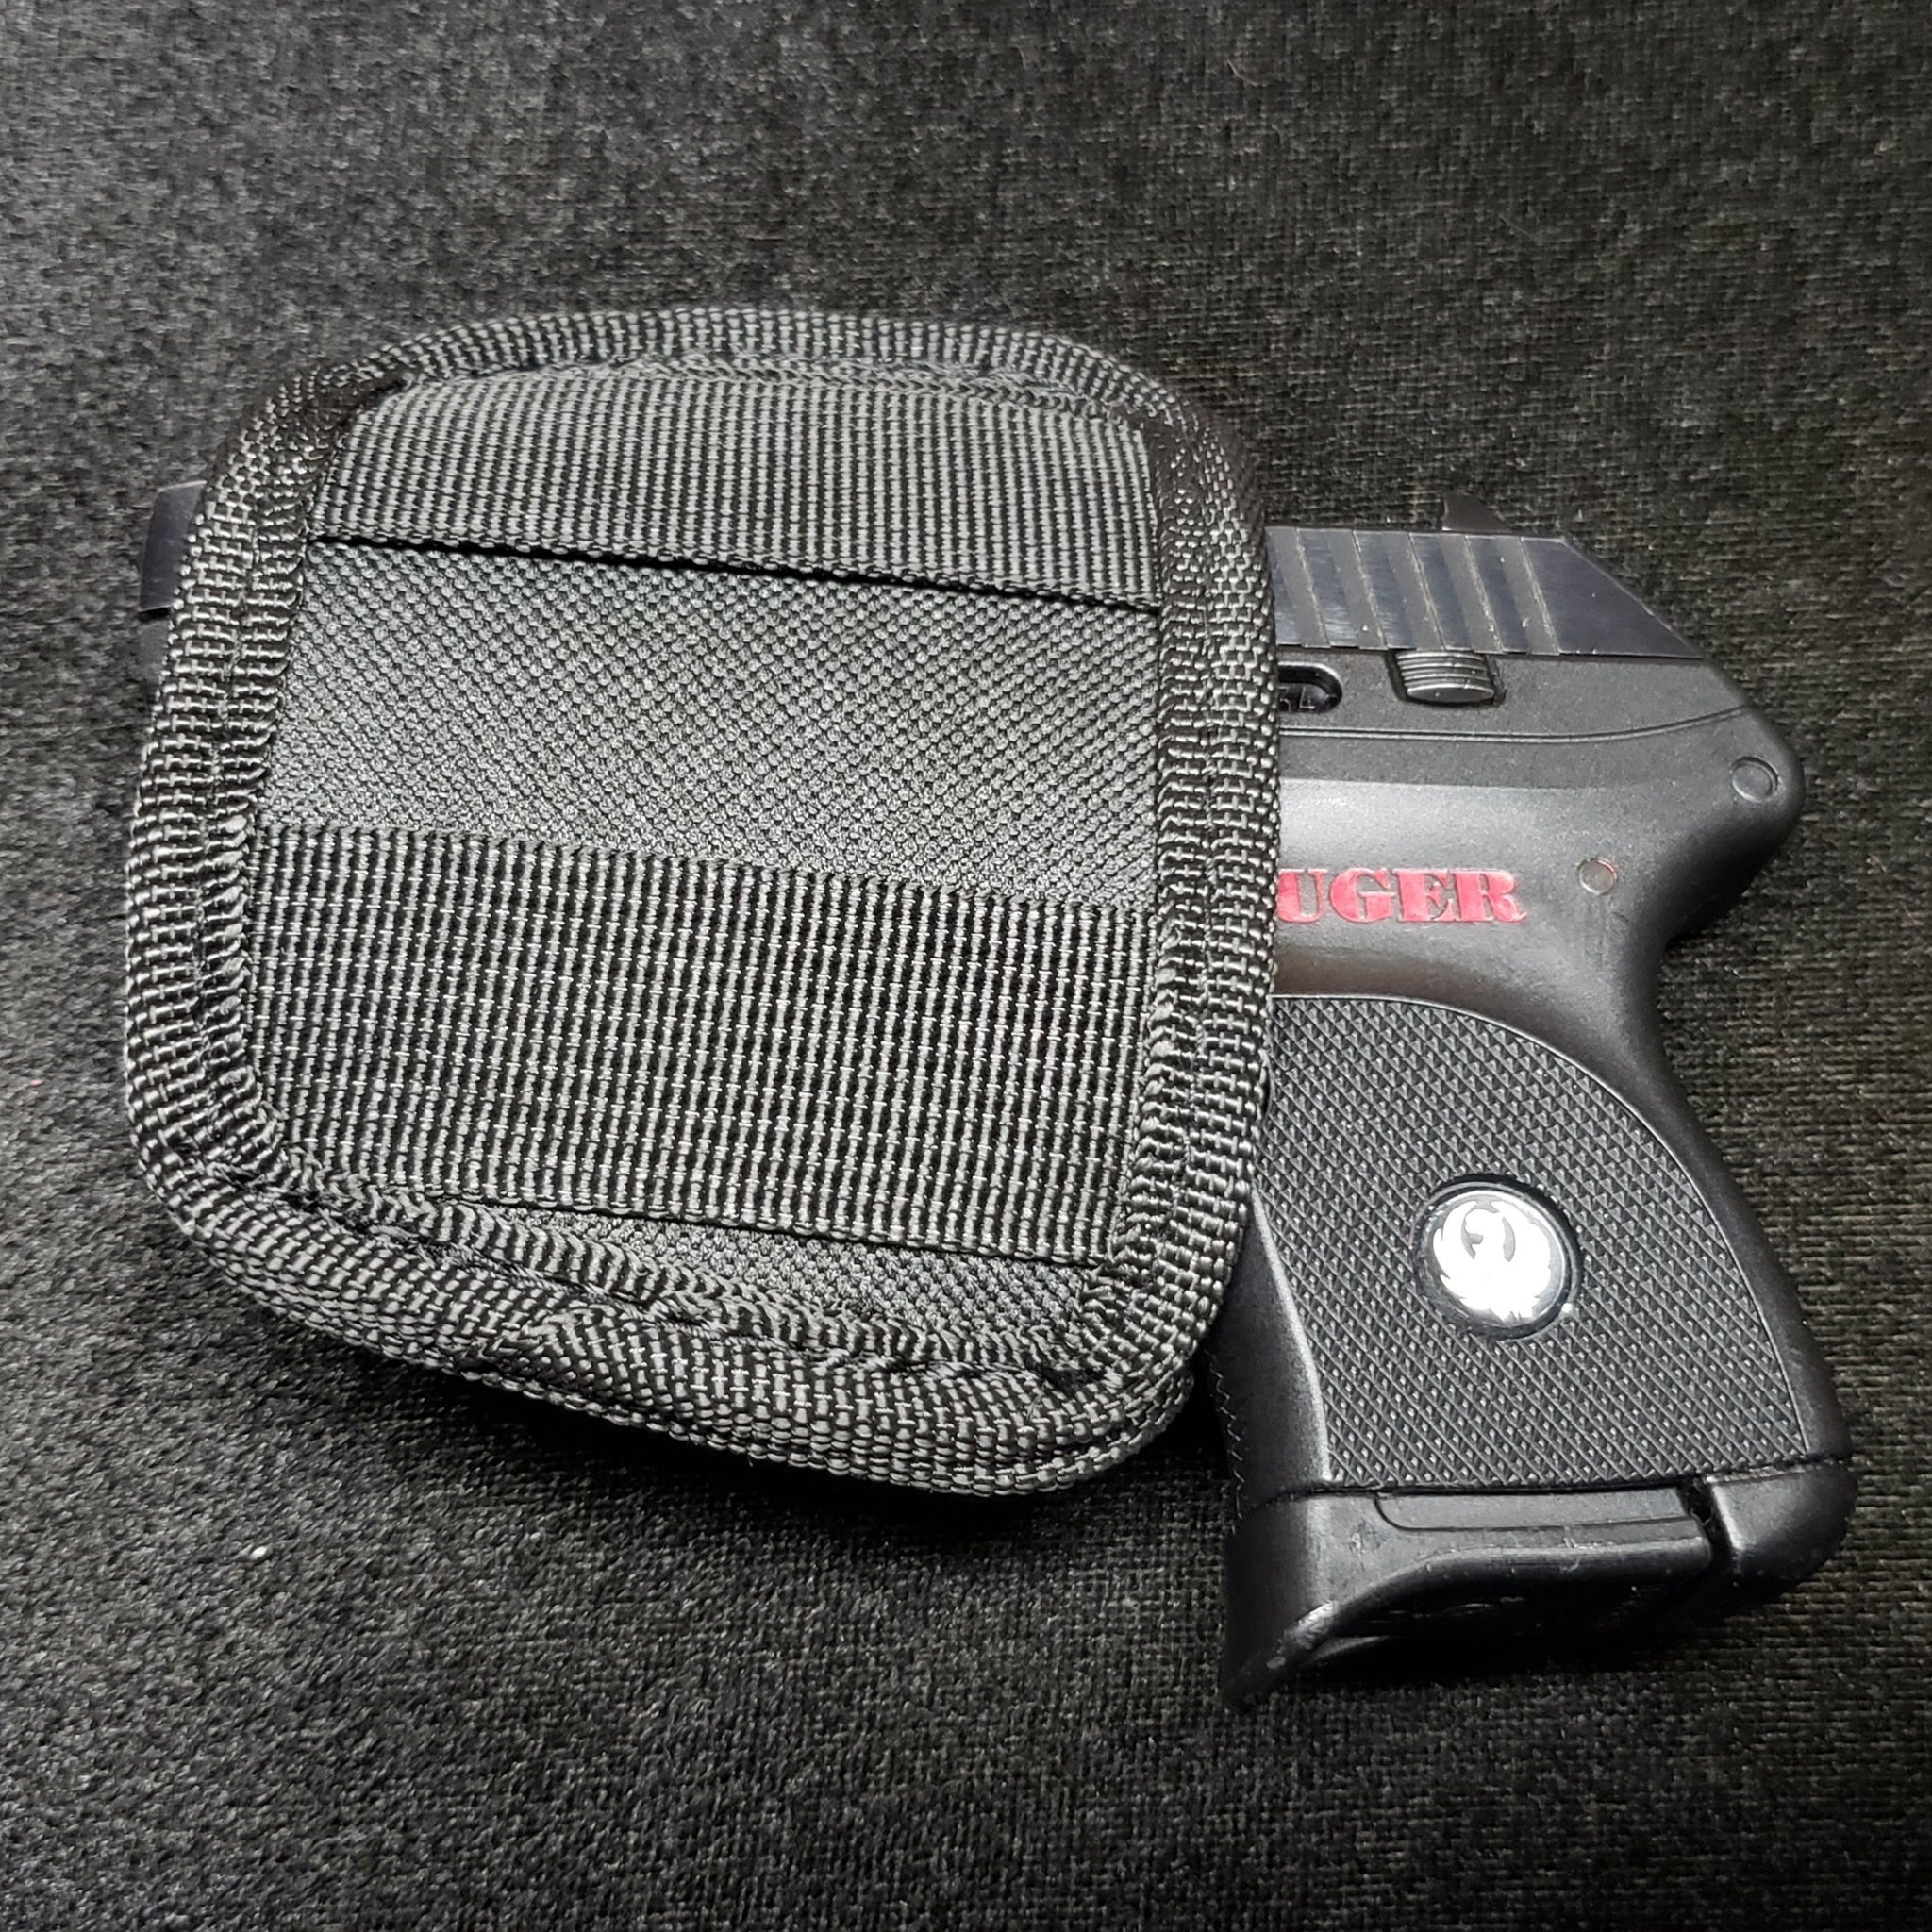 SIZE EXTRA SMALL FOR P365, TCP, LCP, PHOENIX ARMS, IWB GUN HOLSTER OPT – CR  Tactical Defense